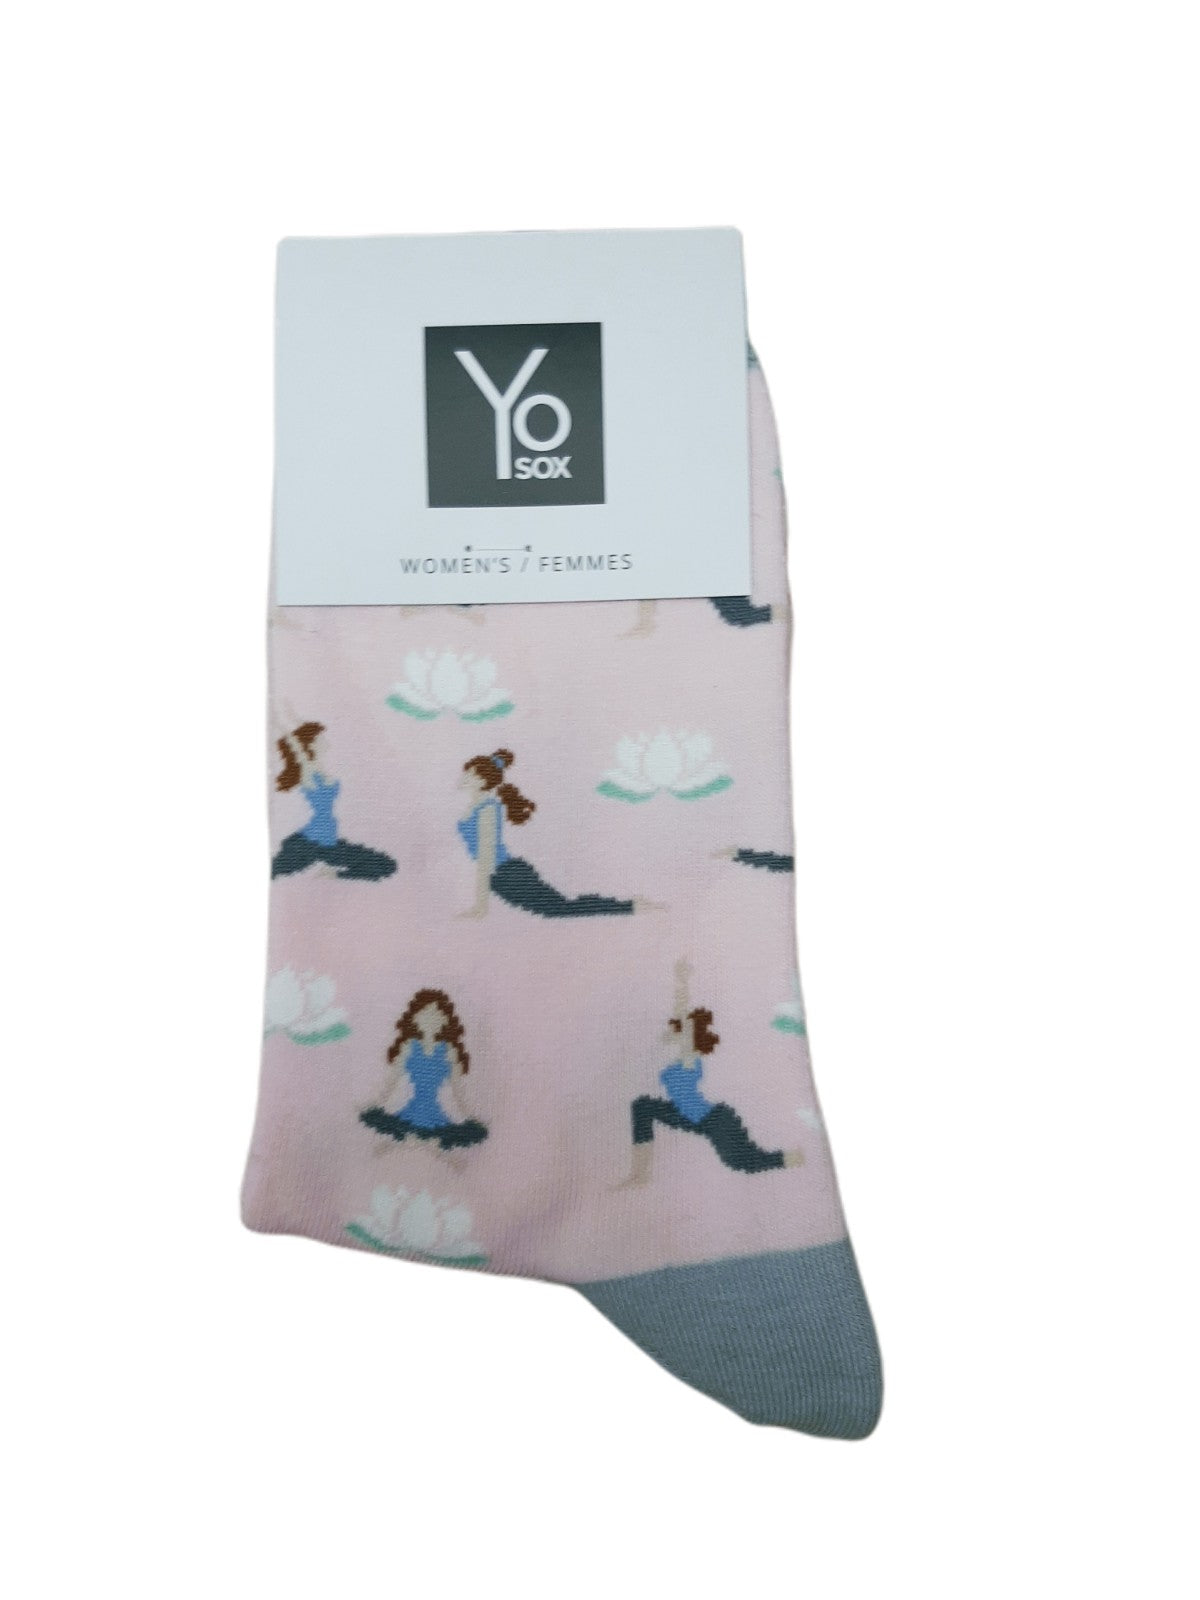 Conversation-Starters. That’s what you’ll find with our top-selling premium sock brand. The selection of bold and colorful  women’s socks are crafted in a blend of ultra-soft compact cotton with a touch of elastane for all day comfort and wear. Each pair features reinforced heels and toes, and are anti-microbial  Choose from 19 designs